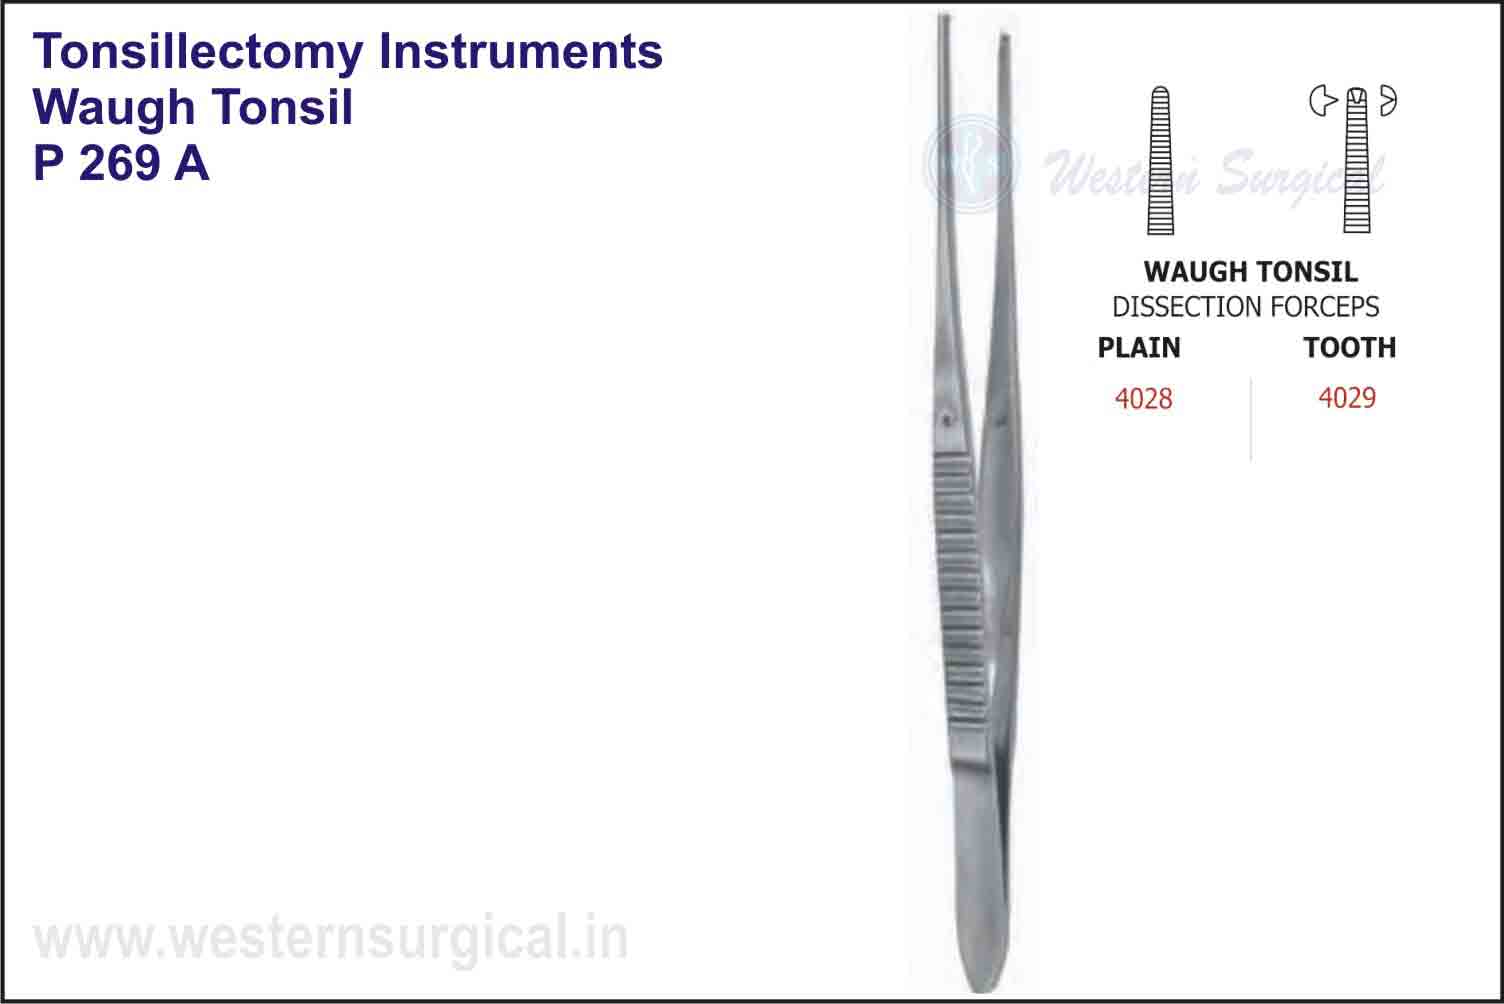 WAUGH TONSIL DISSECTION FORCEPS